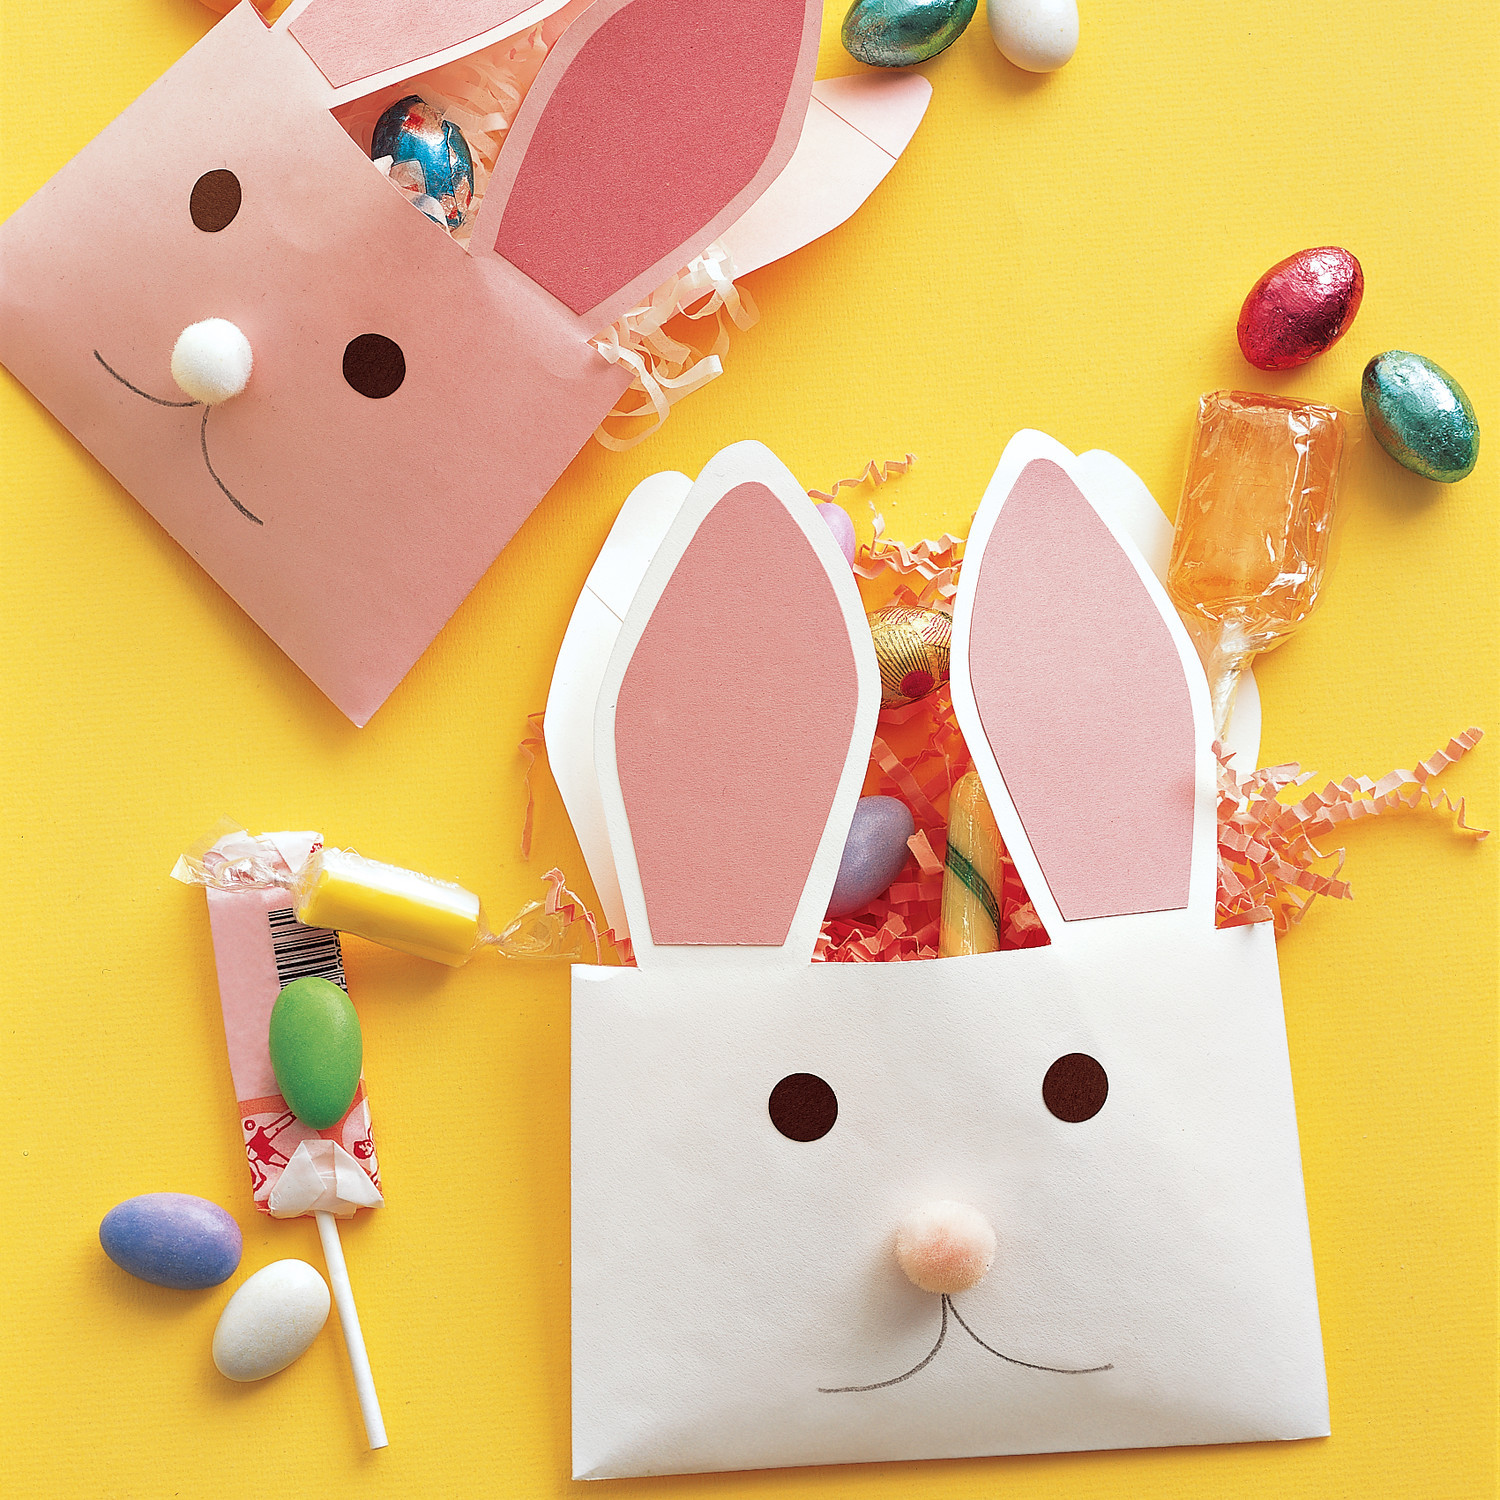 Crafting For Kids
 The Best Easter Crafts and Activities for Kids